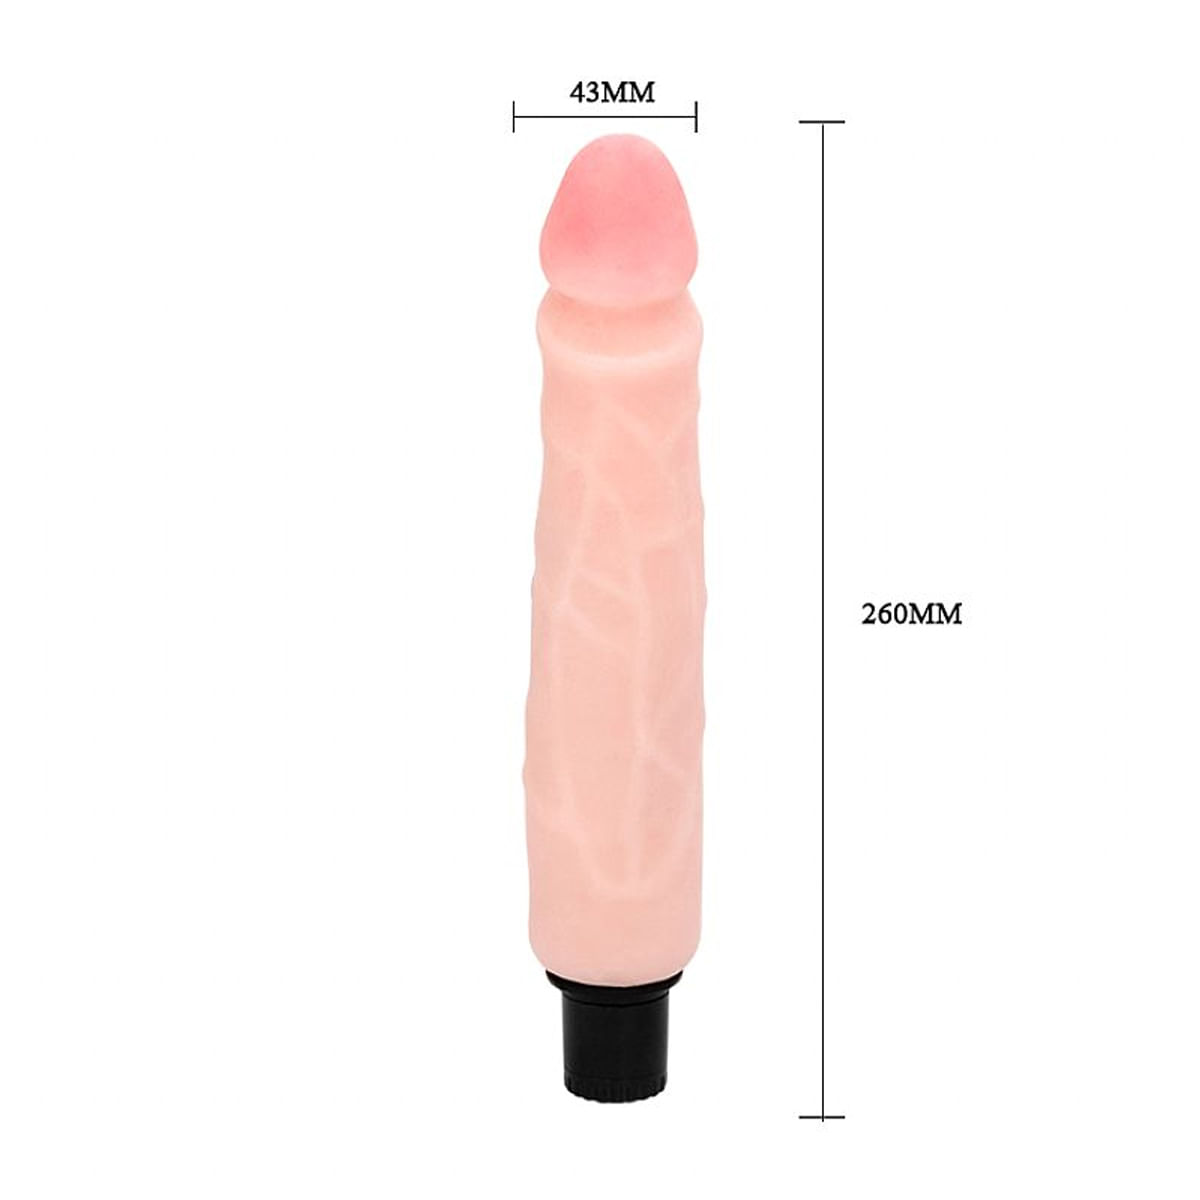 The Realistic Cock Baile Pênis Realístico em CyberSkin com 26cm Miss Collection